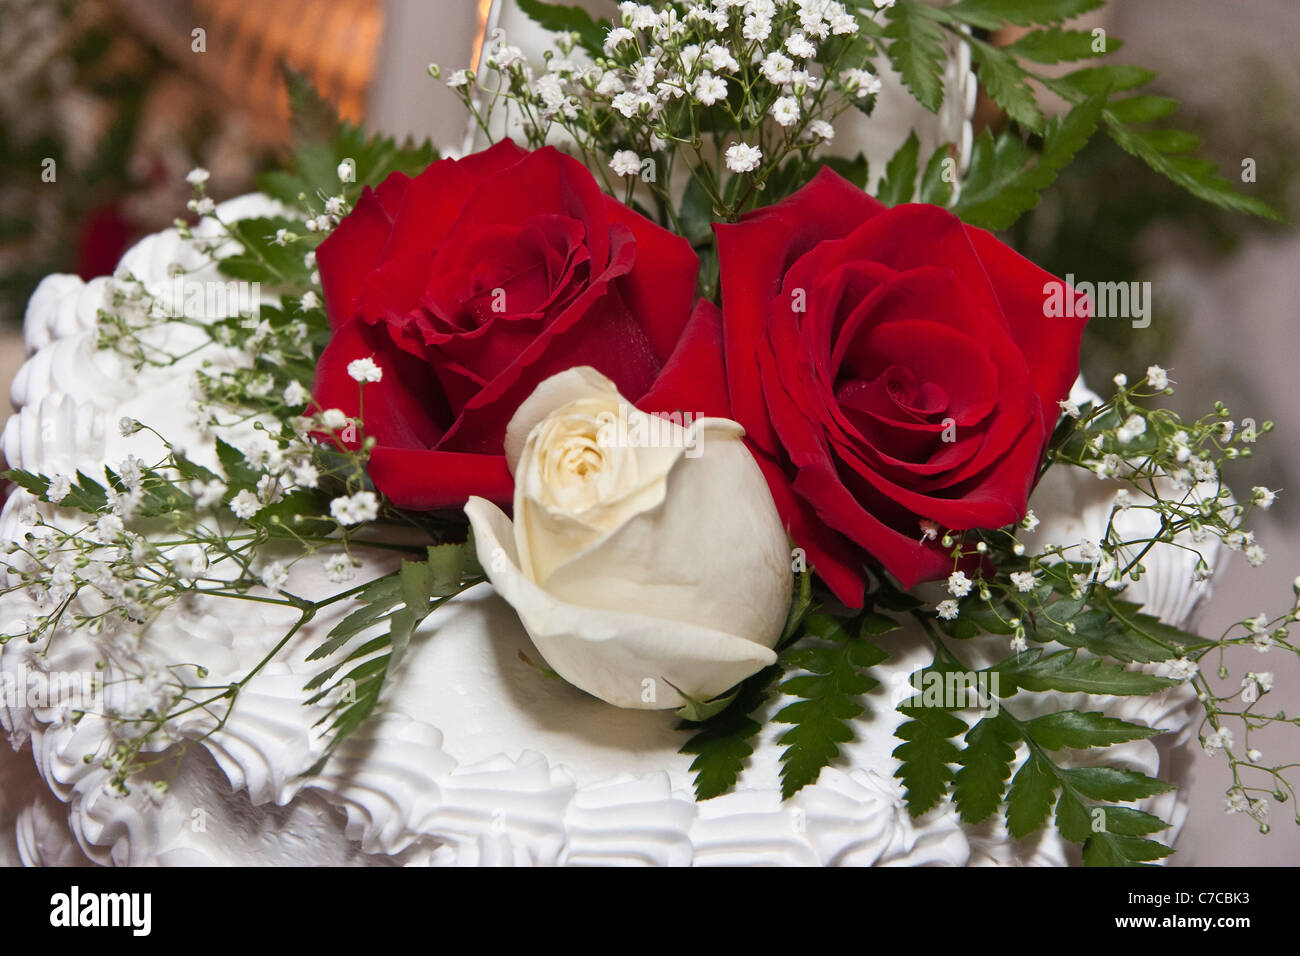 Top layer of wedding cake decorated with white and red roses Stock Photo